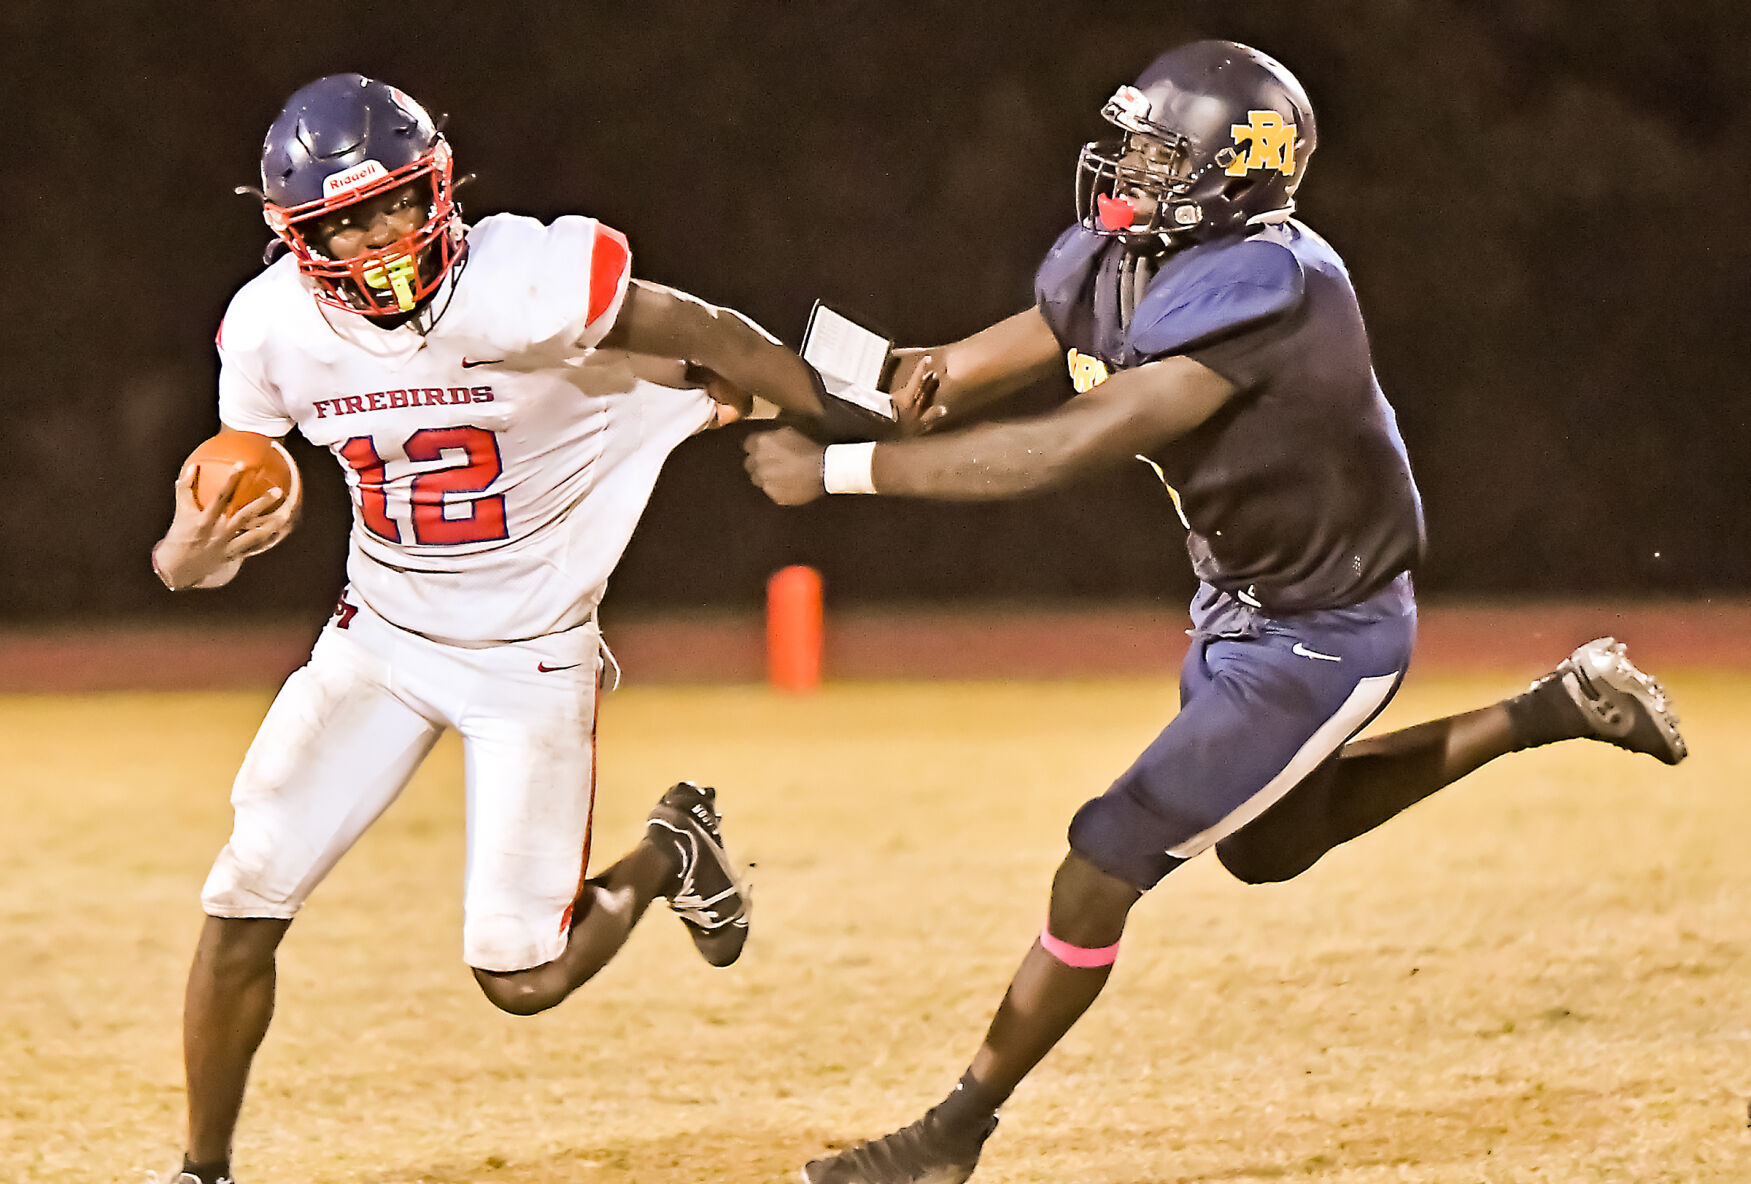 Late scores help Firebirds hold off Rocky Mount